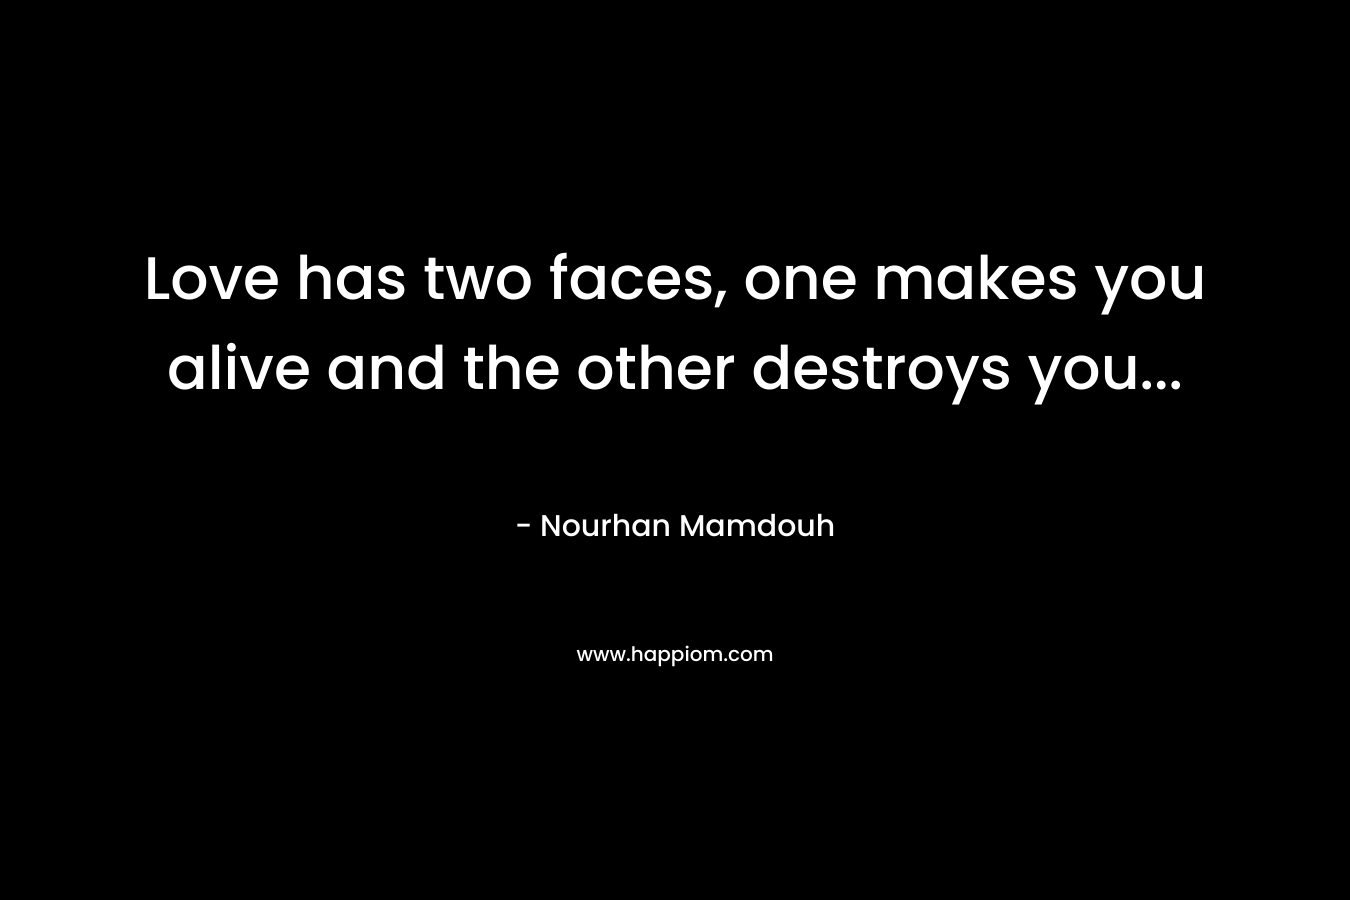 Love has two faces, one makes you alive and the other destroys you… – Nourhan Mamdouh